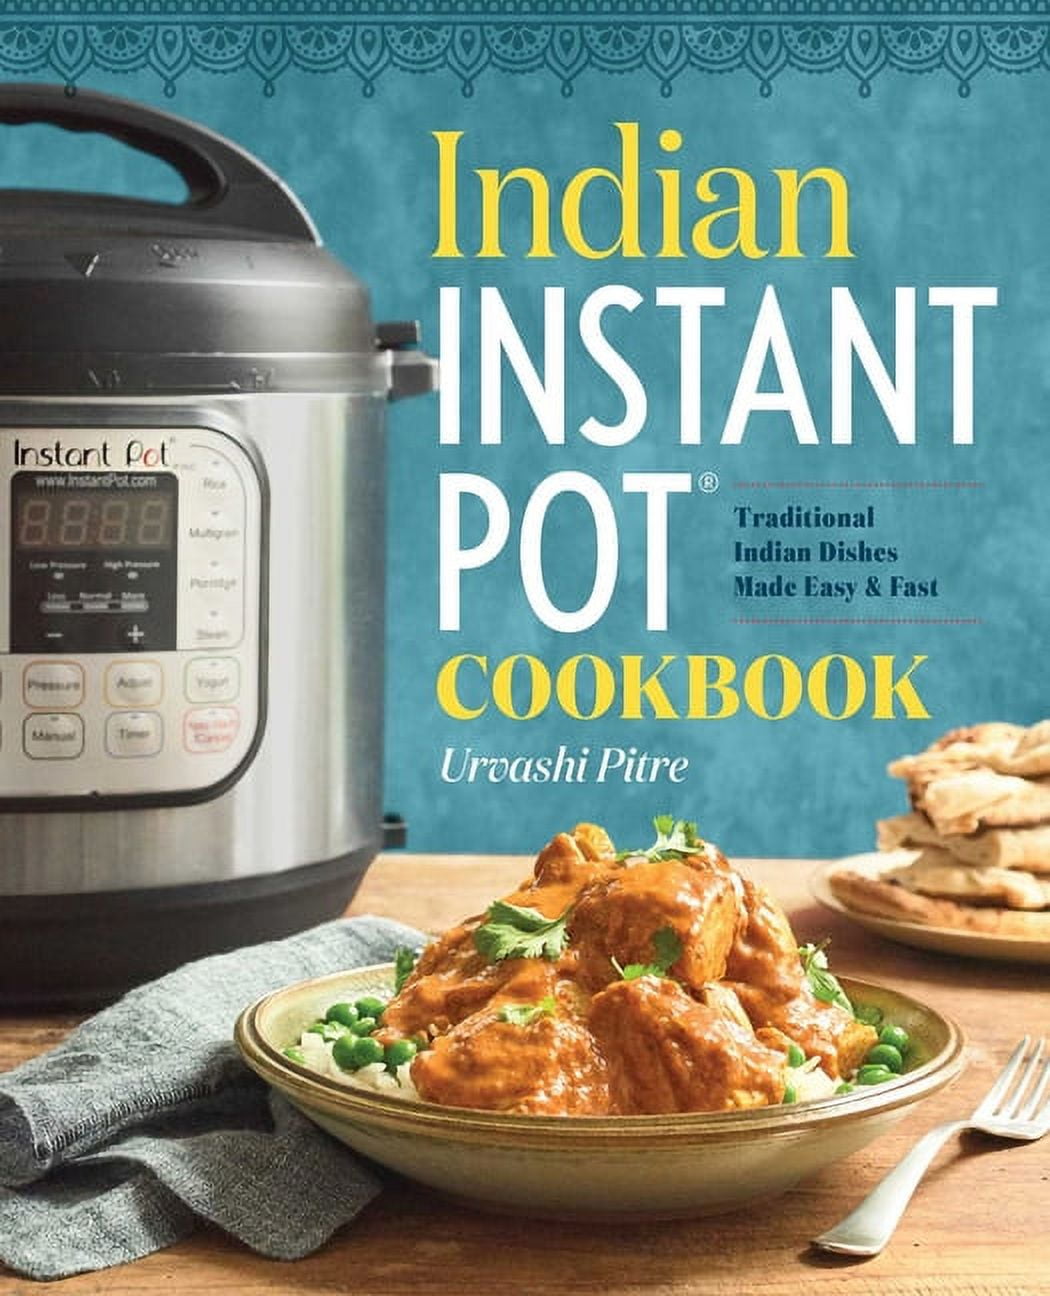 Accessories and Tools for Instant Pot Cooking - dummies